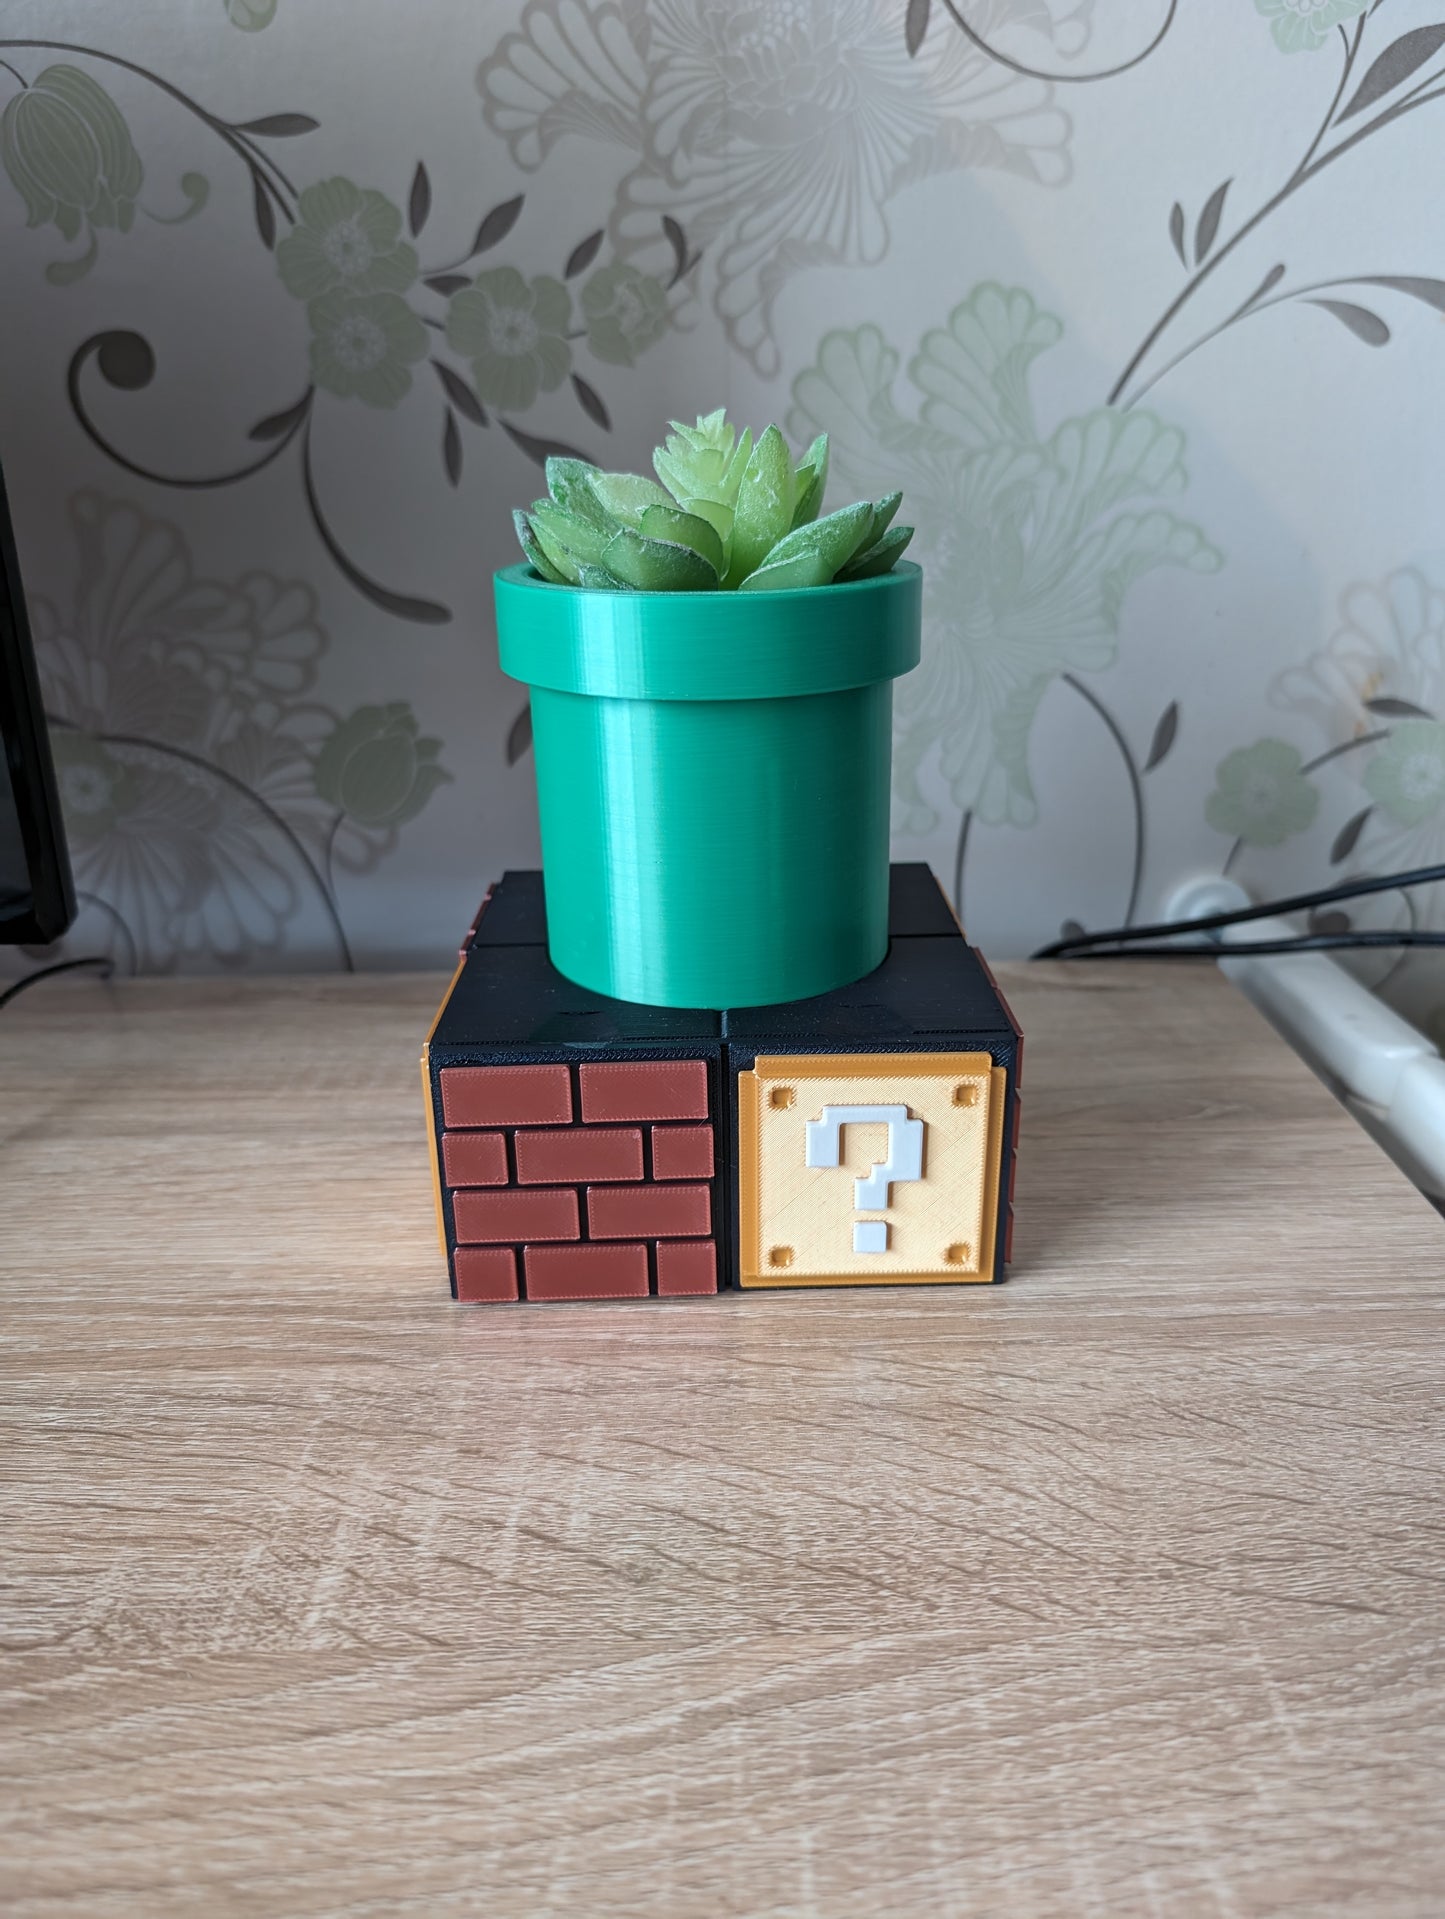 Mario desk organiser from the front